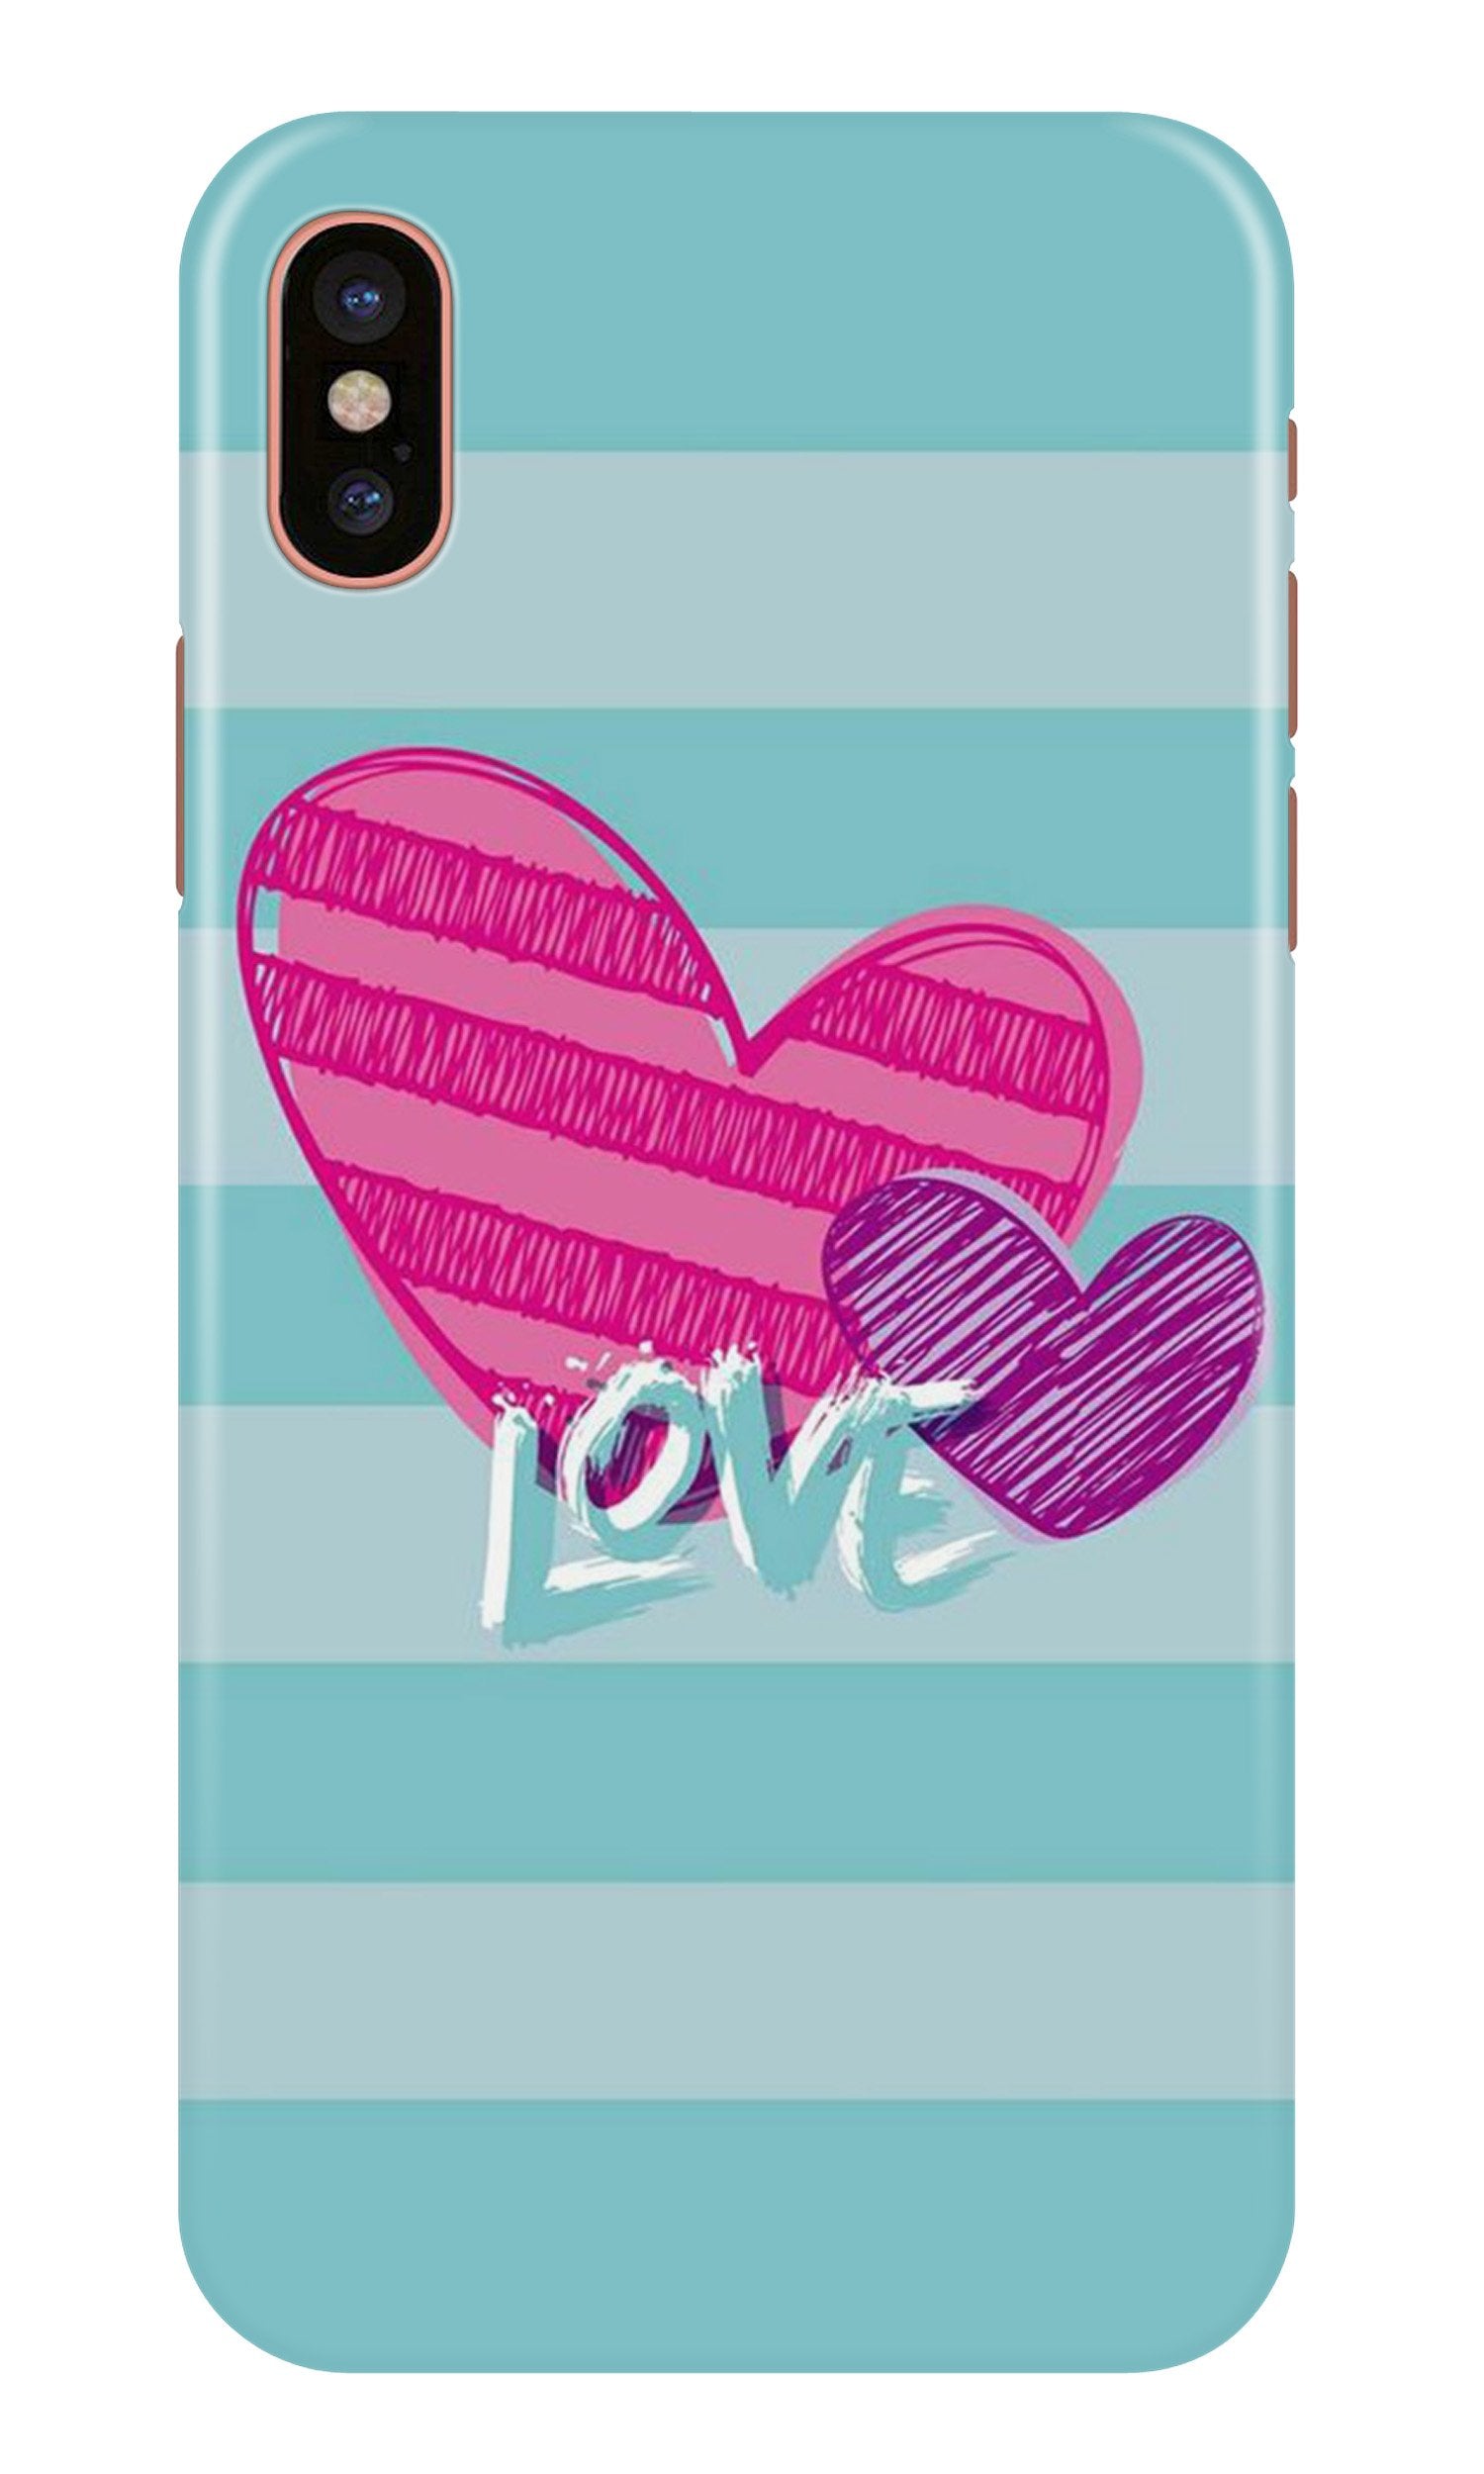 Love Case for iPhone Xs Max (Design No. 299)